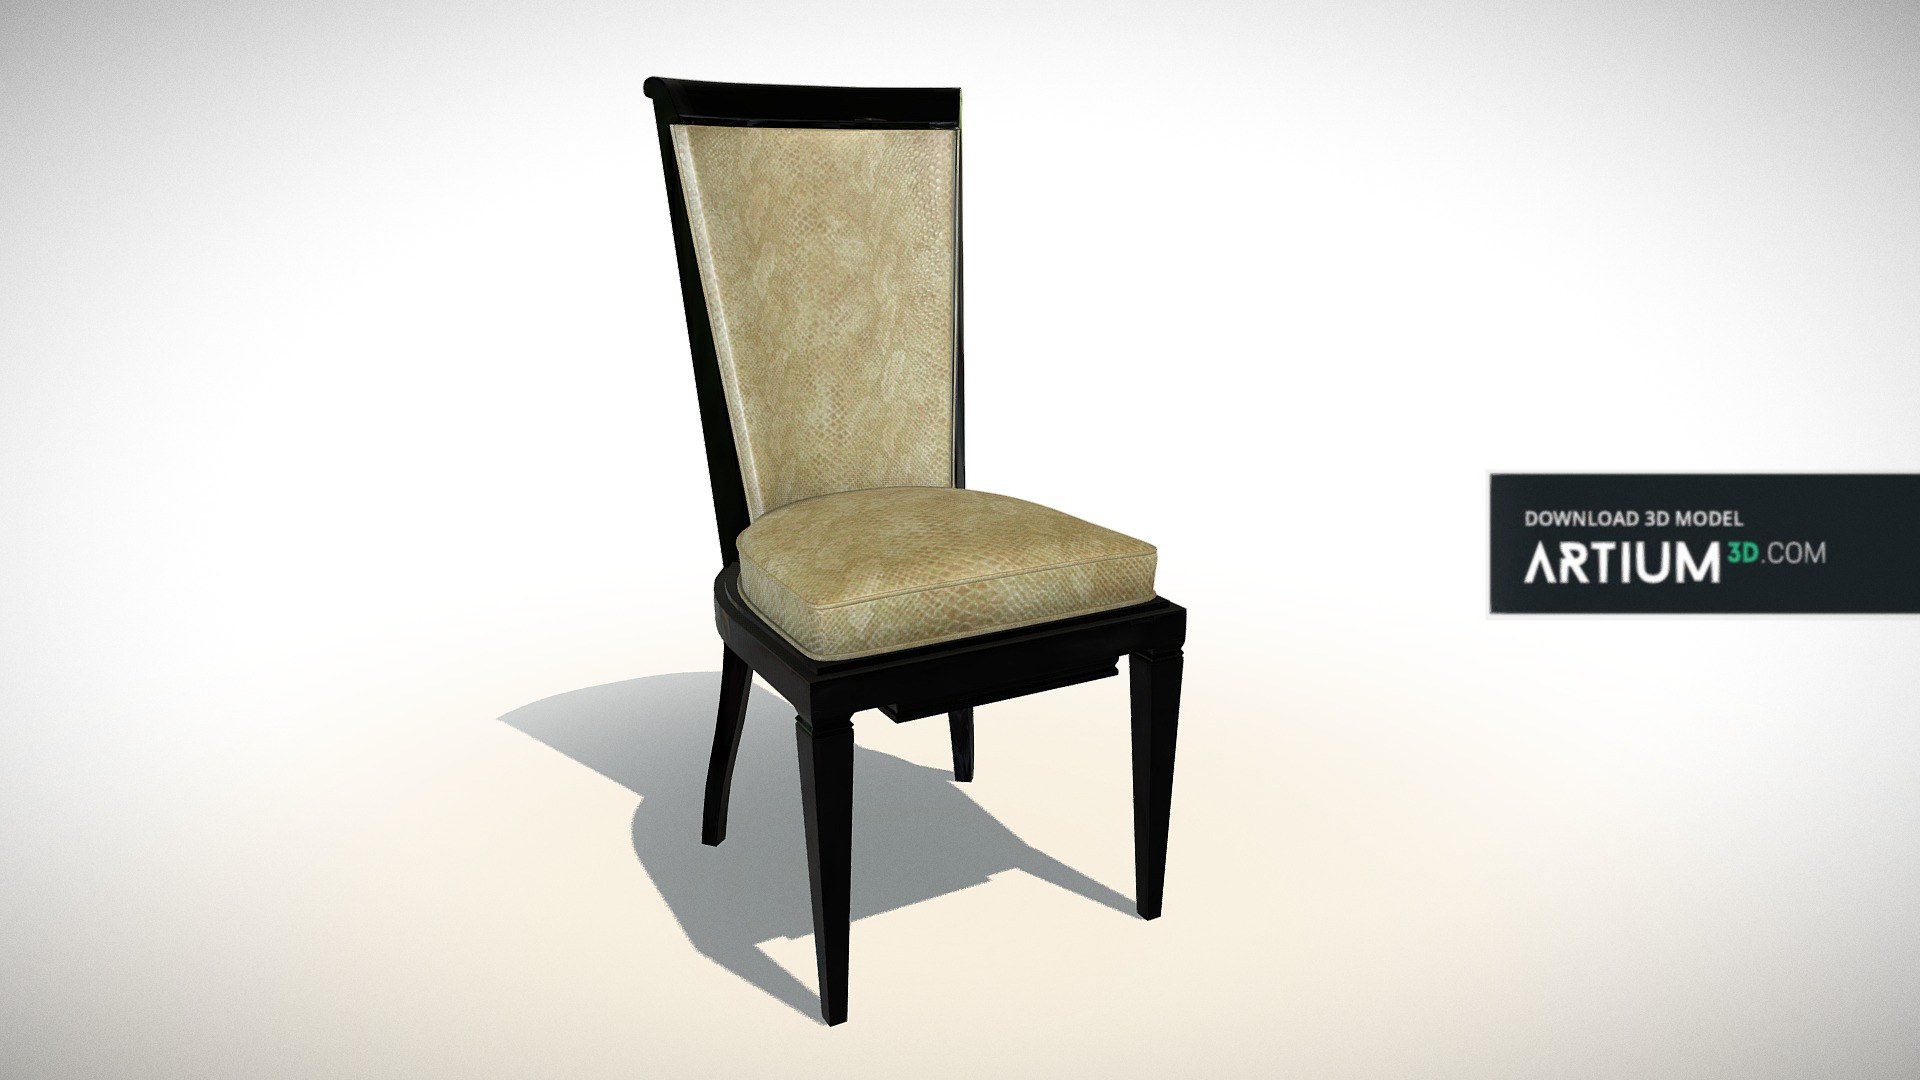 3D model Chair – Art Deco 1920 - This is a 3D model of the Chair – Art Deco 1920. The 3D model is about a chair with a cushion.